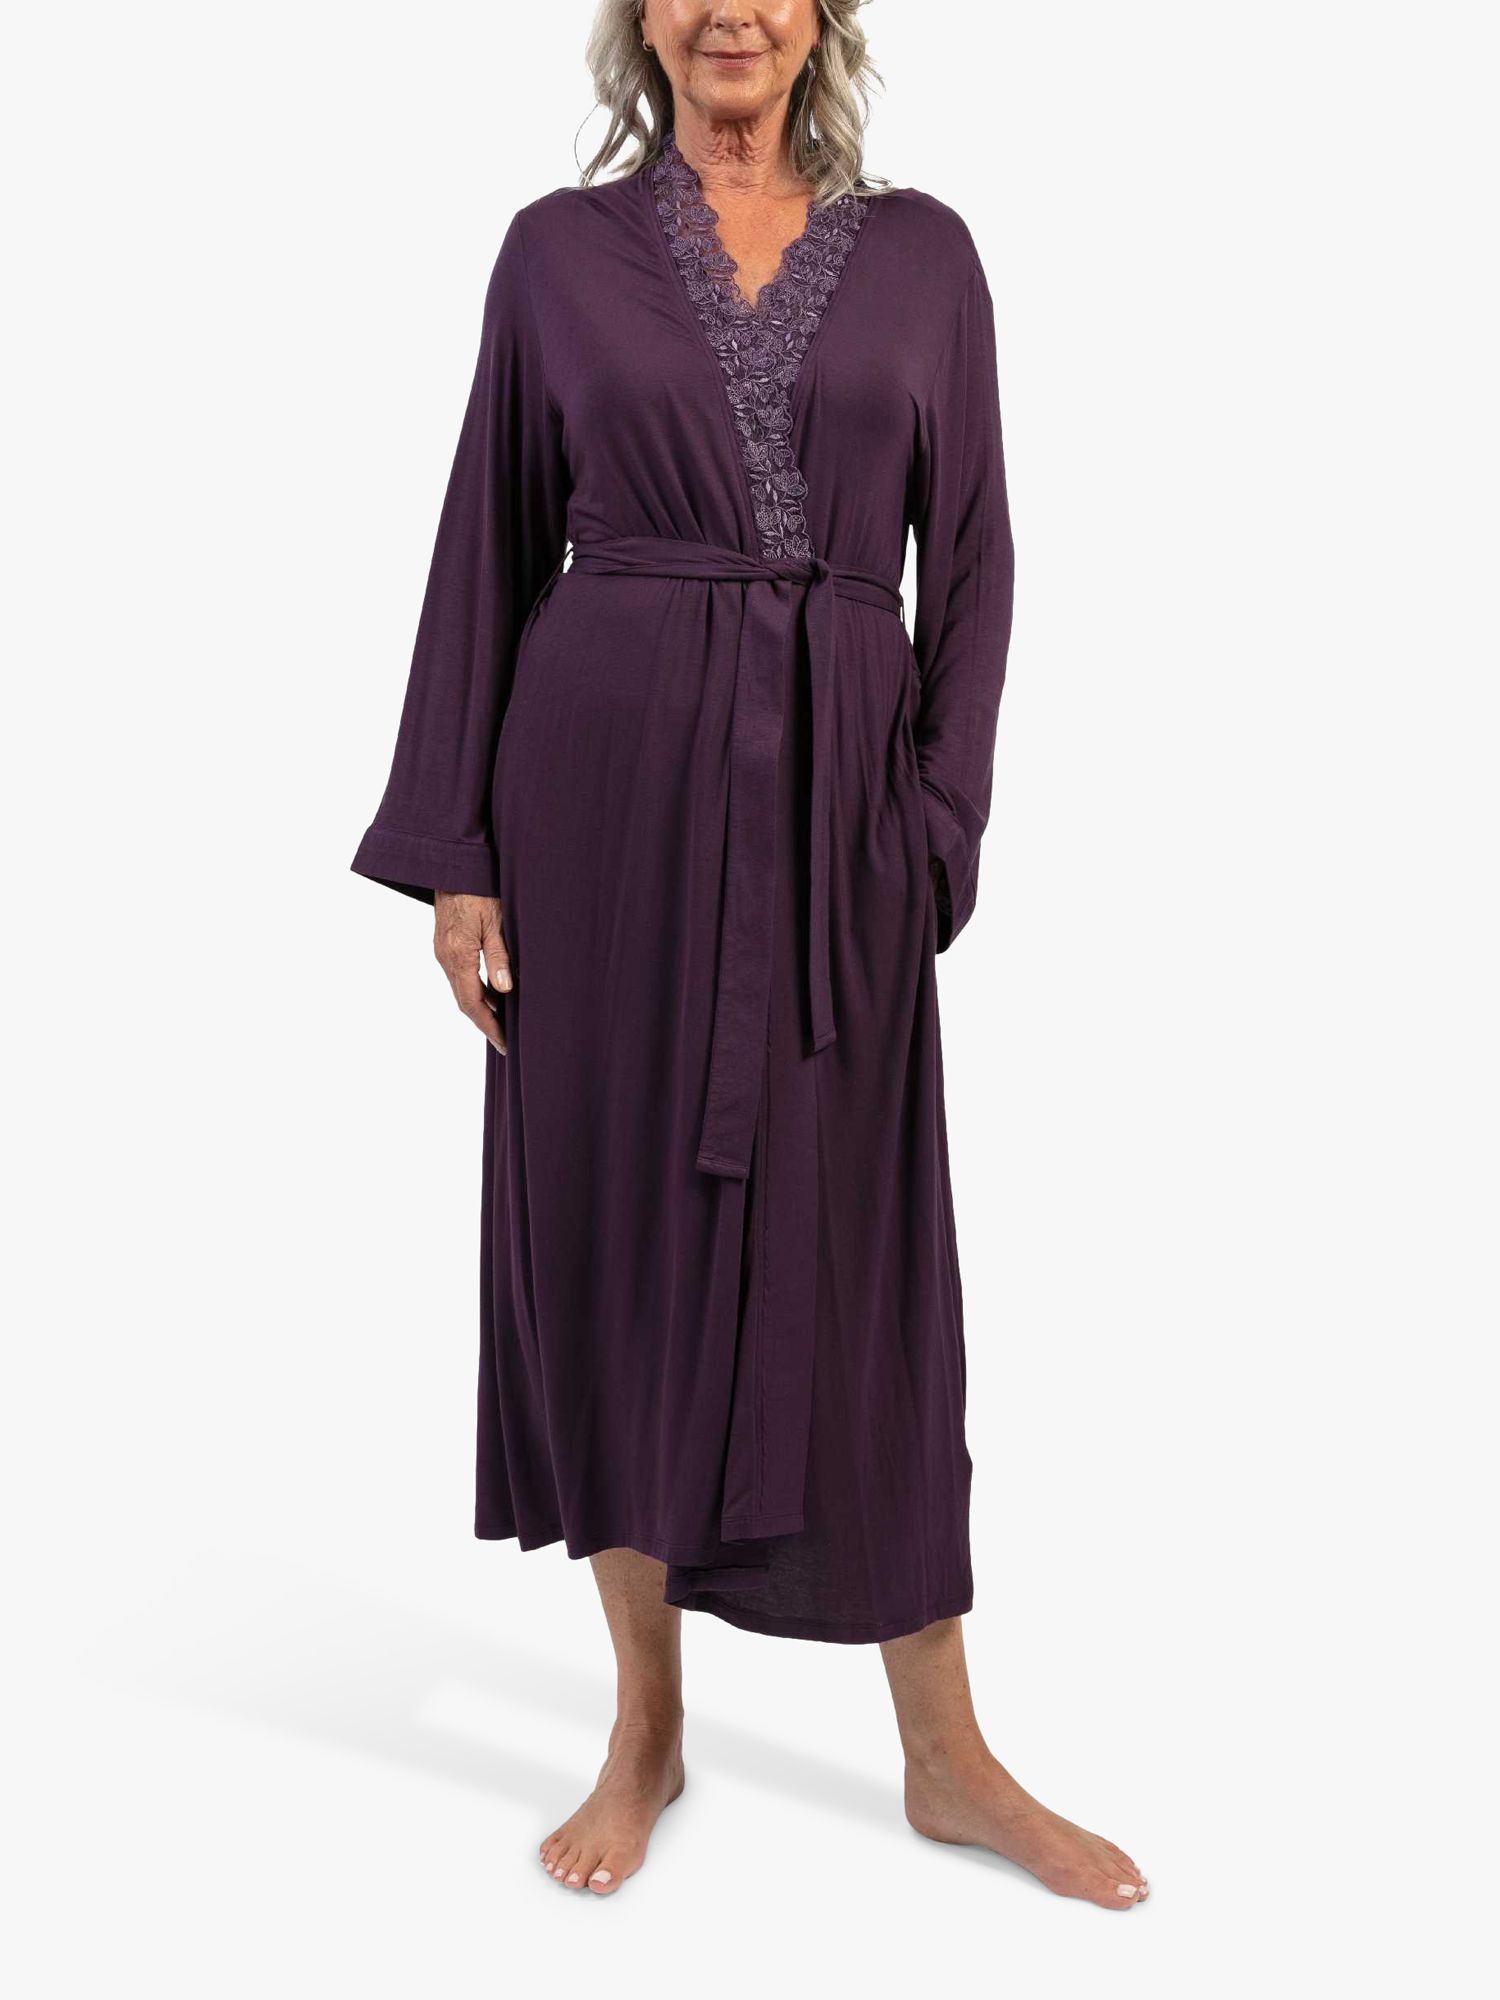 Nora by Cyberjammies Maeve Lace Detail Knit Dressing Gown, Purple at John Lewis & Partners